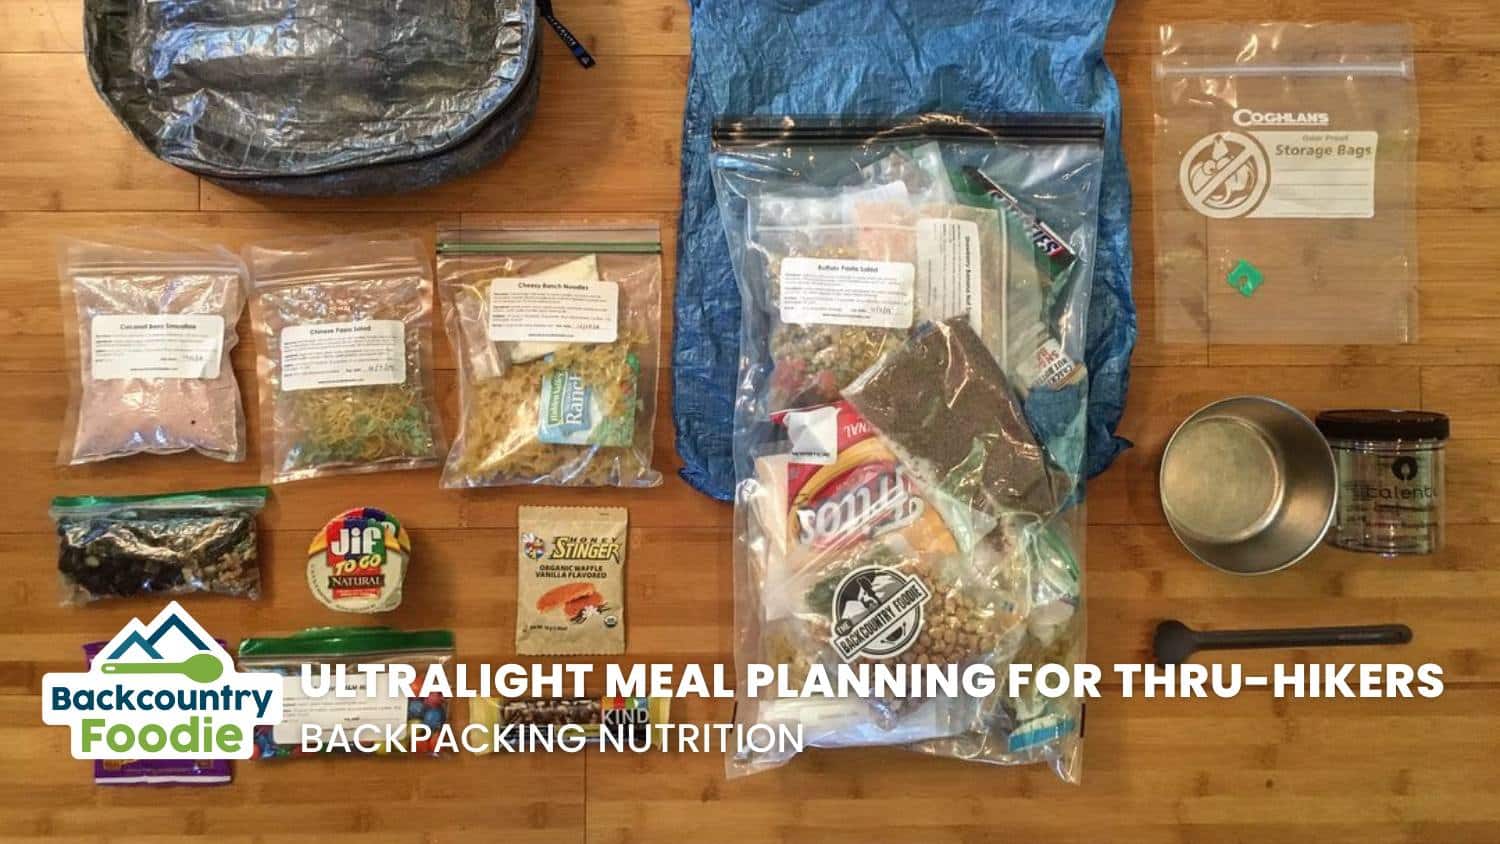 Backcountry Foodie Ultralight Backpacking Meal Planning Tips for Thru Hikers blog thumbnal image